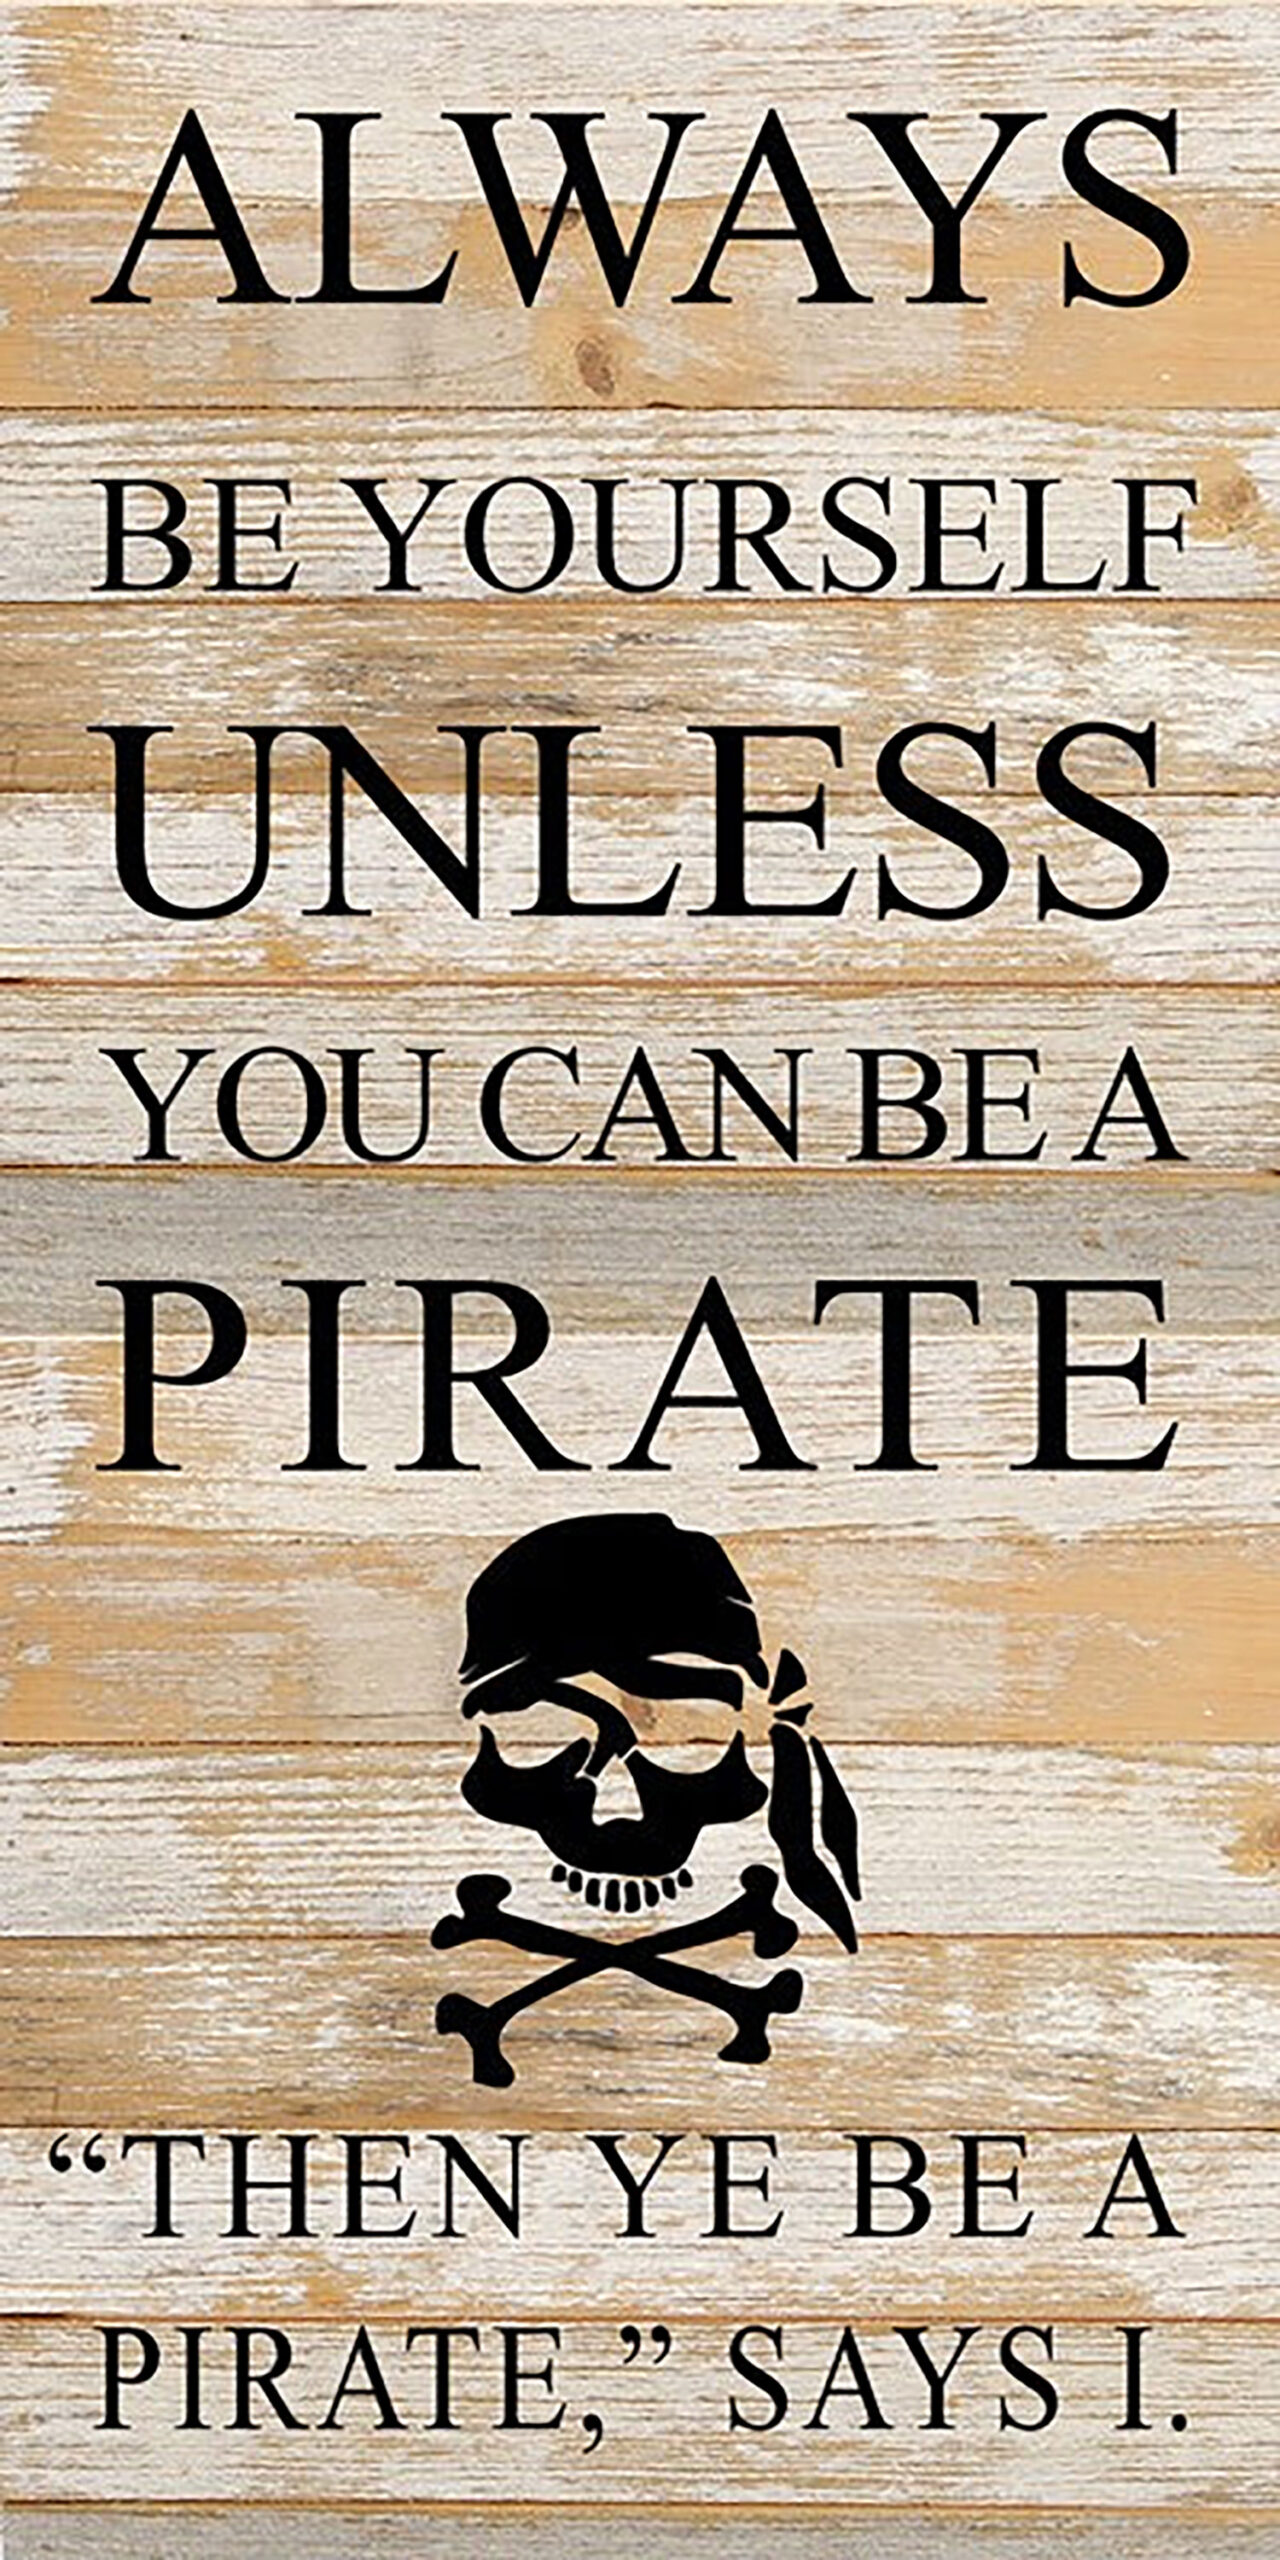 Always be yourself unless you can be a pirate, "Then ye be a pirate," says I. / 12"x24" Reclaimed Wood Sign